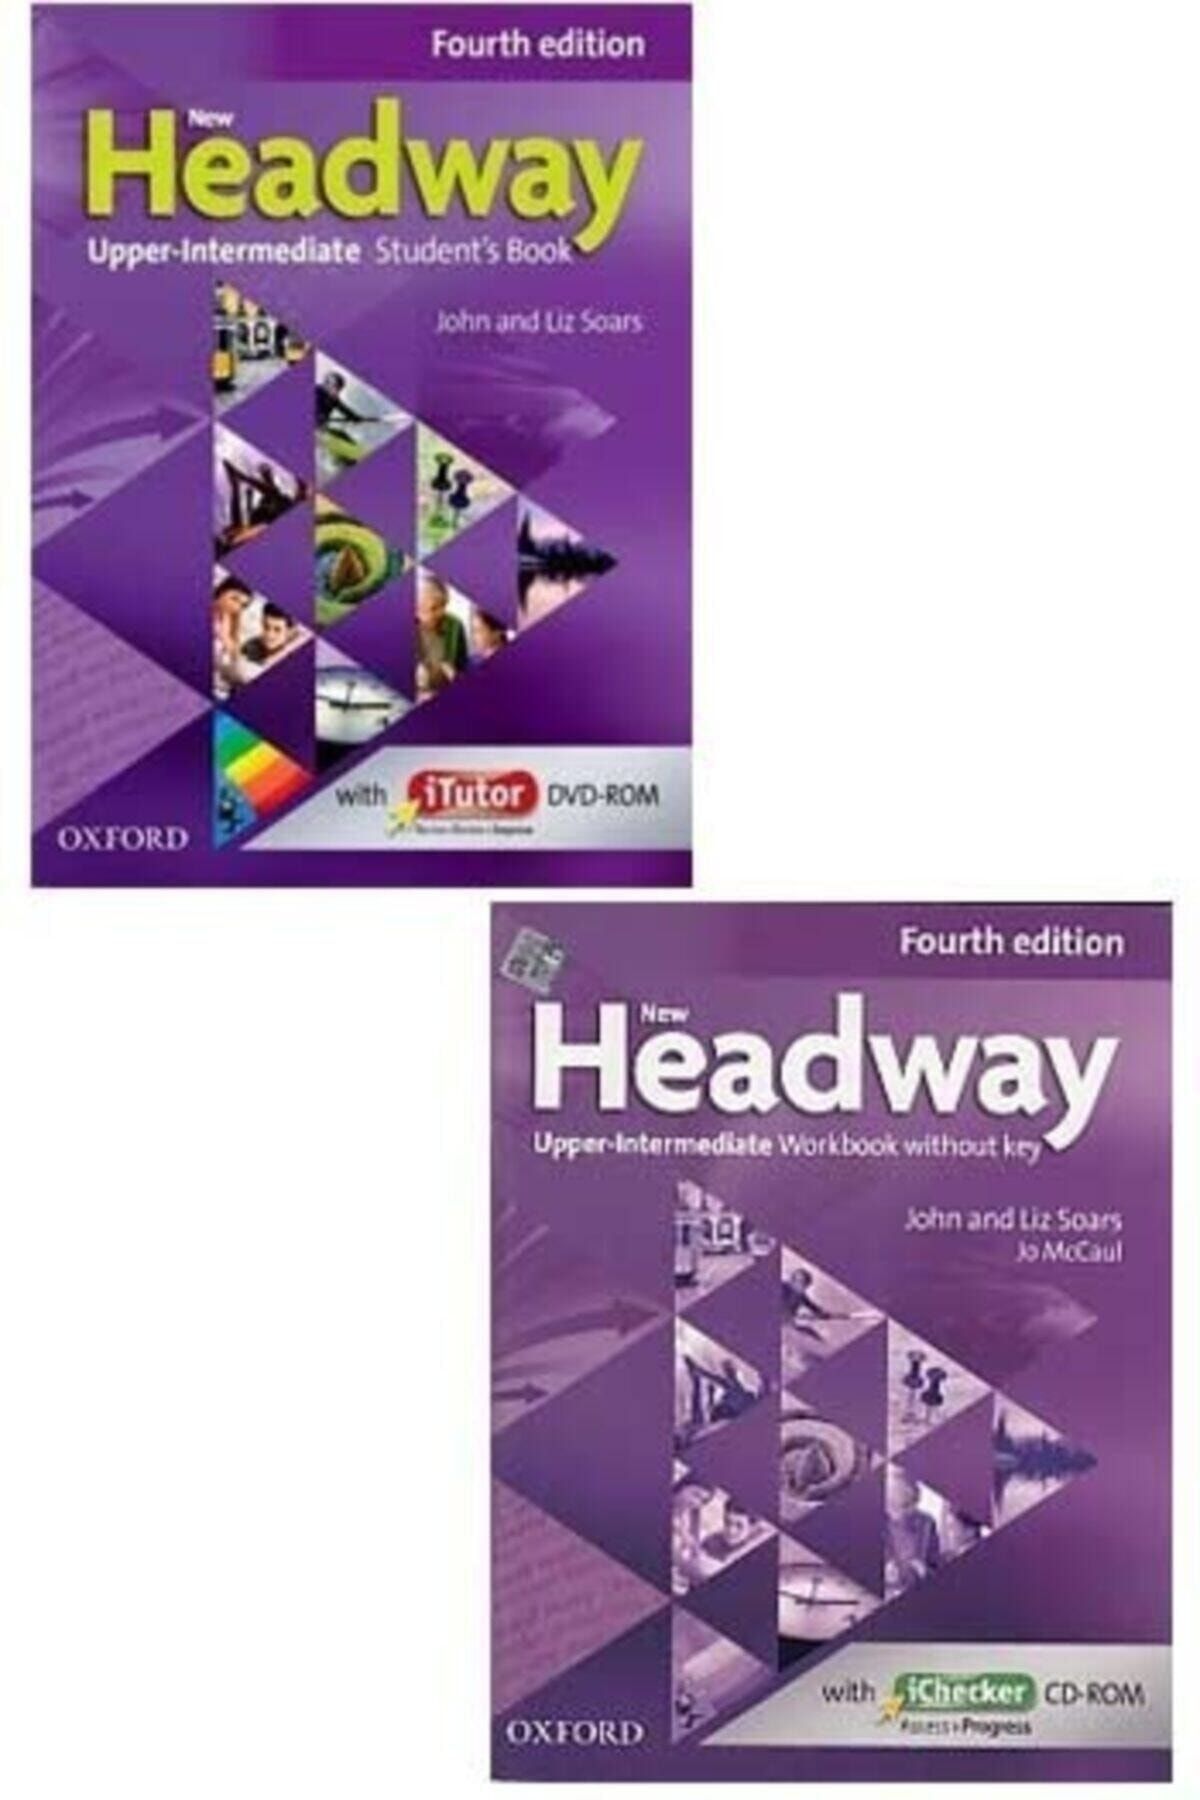 New headway pre intermediate book. Headway Upper Intermediate 4th Edition. New Headway 2 Edition Intermediate student. New Headway pre-Intermediate student's book answer Key. New Headway Intermediate student's book 4th ответы.